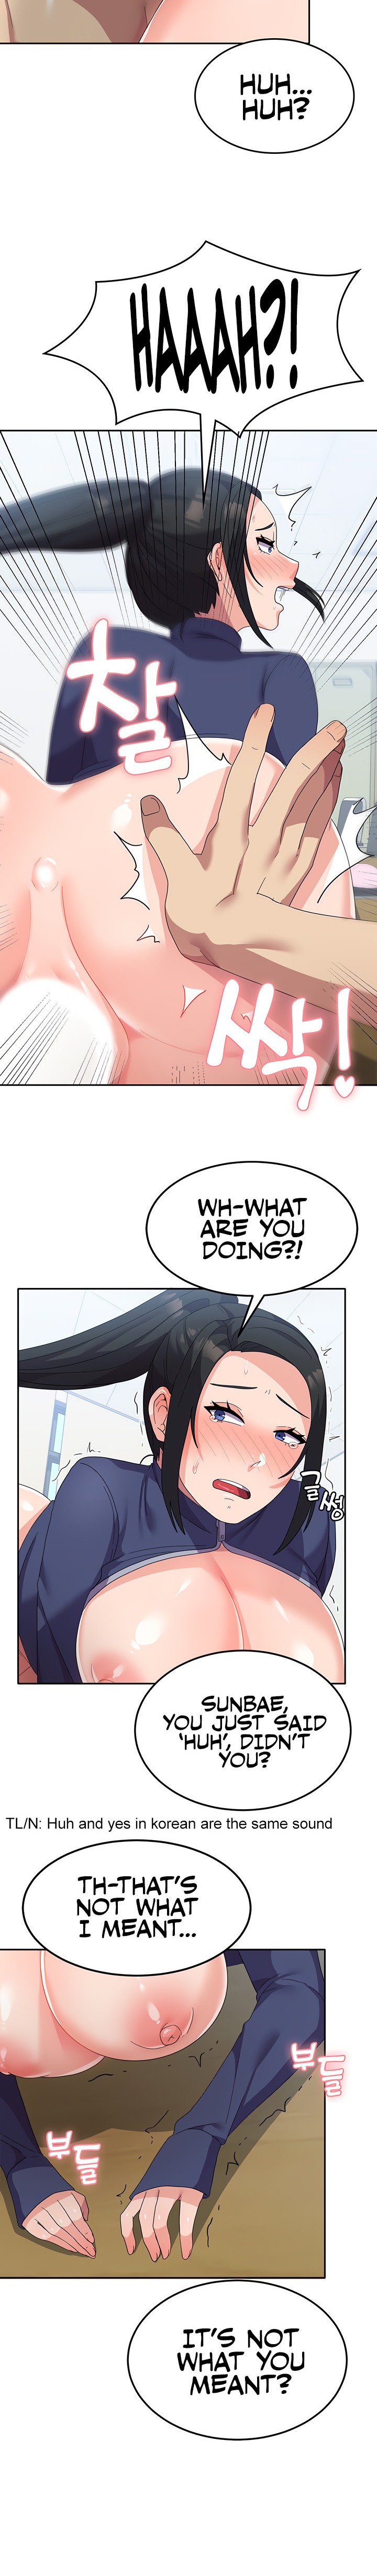 Women’s University Student who Served in the Military - Chapter 20 Page 15